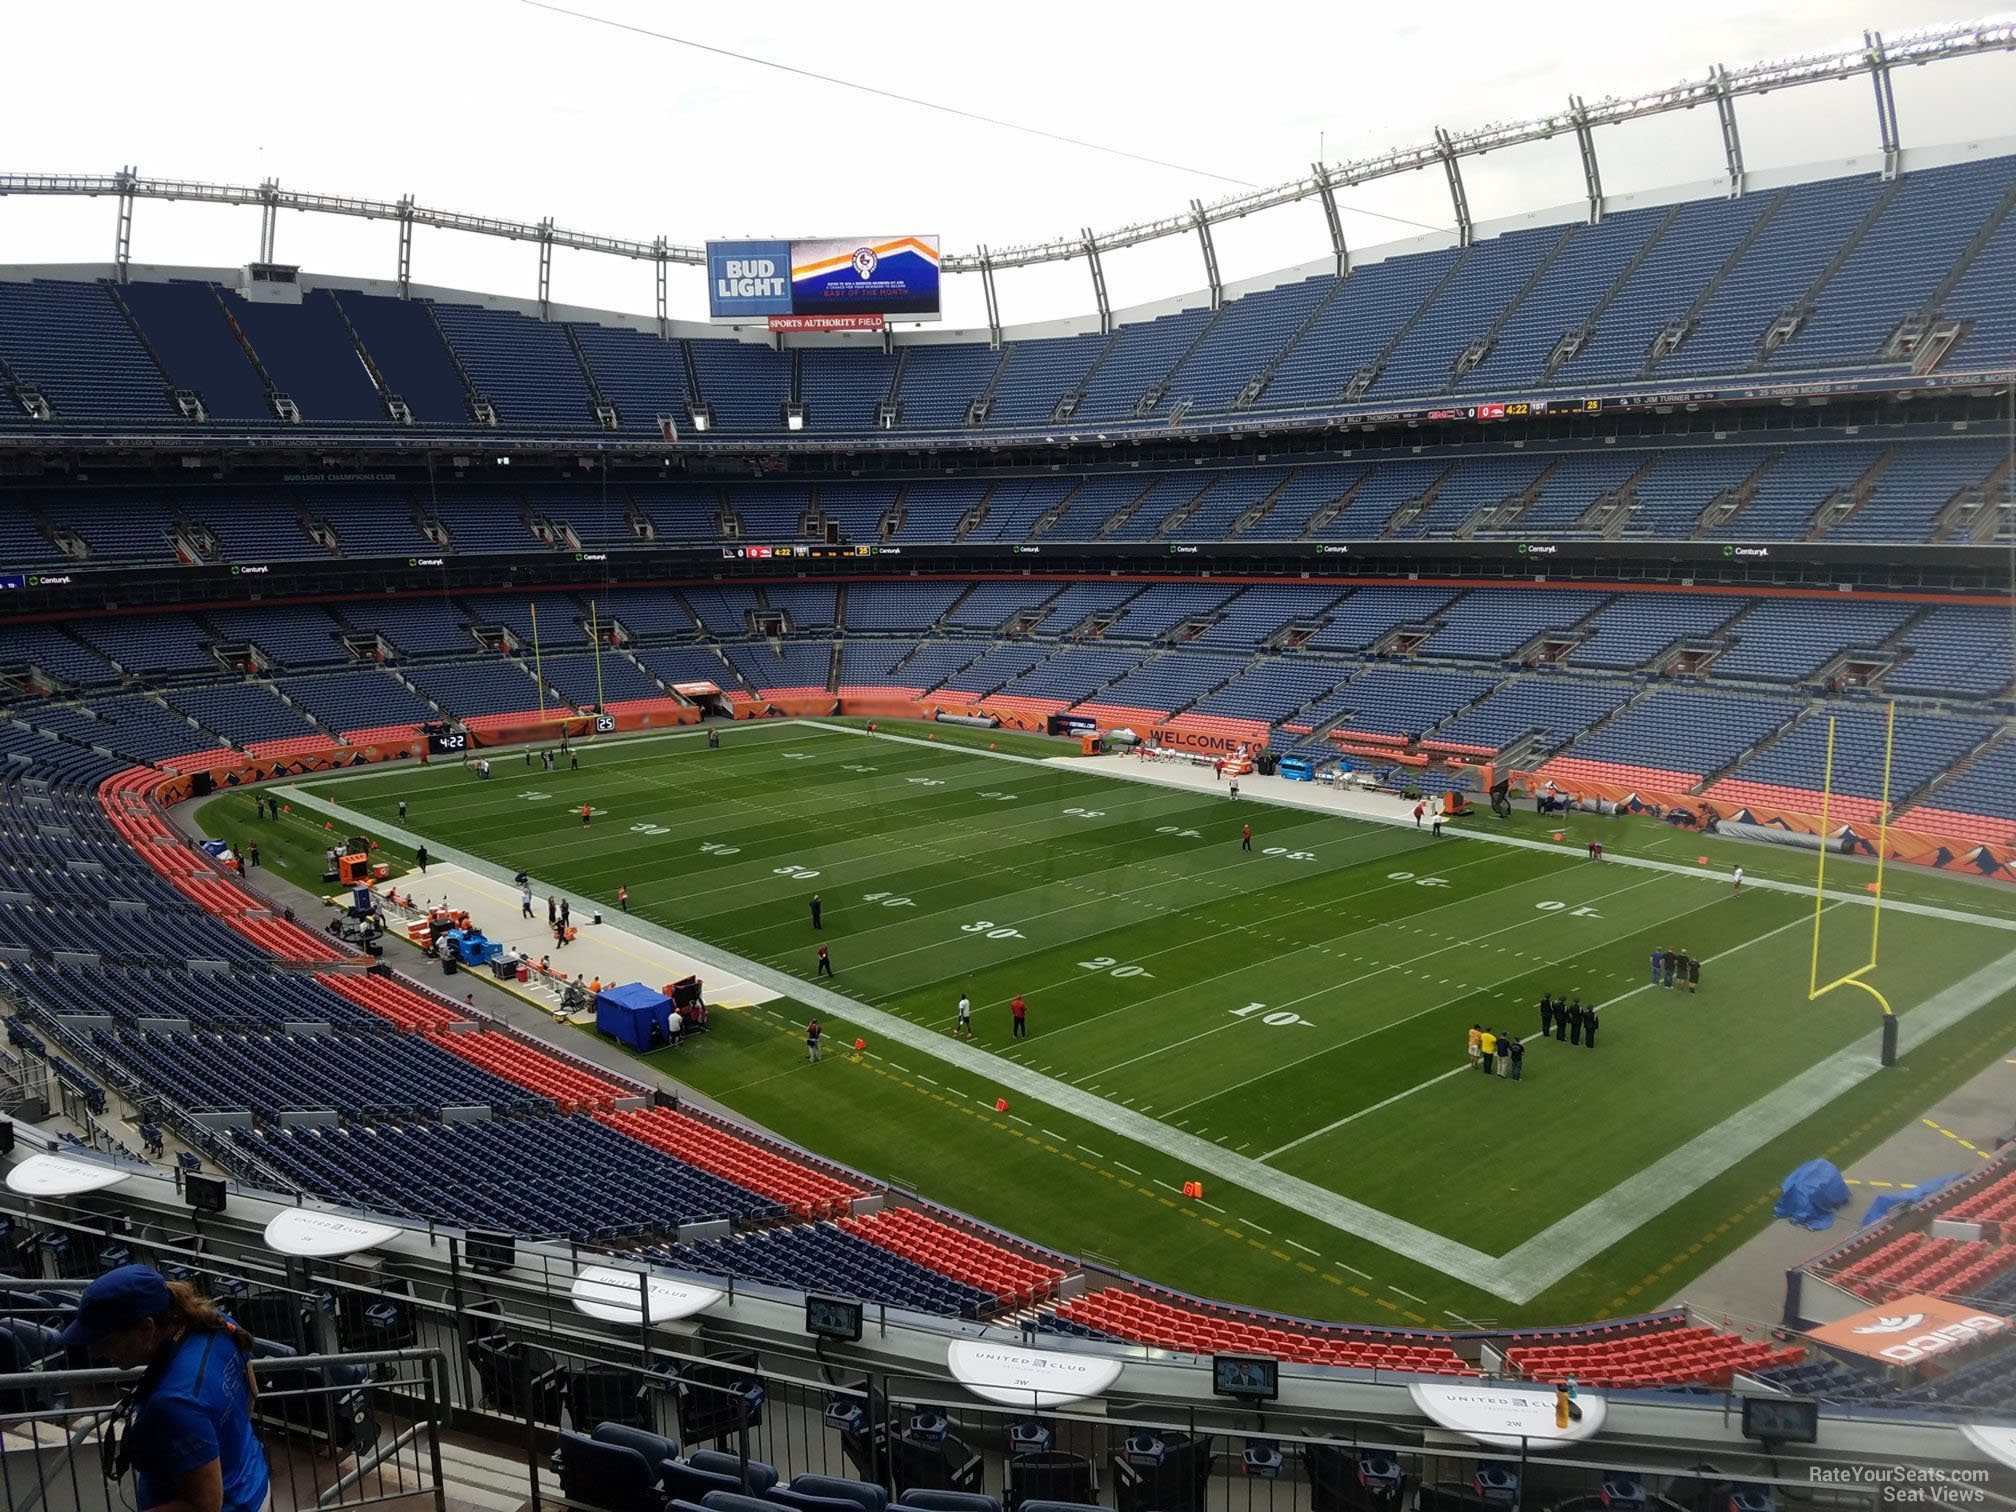 section 301, row 12 seat view  - empower field (at mile high)